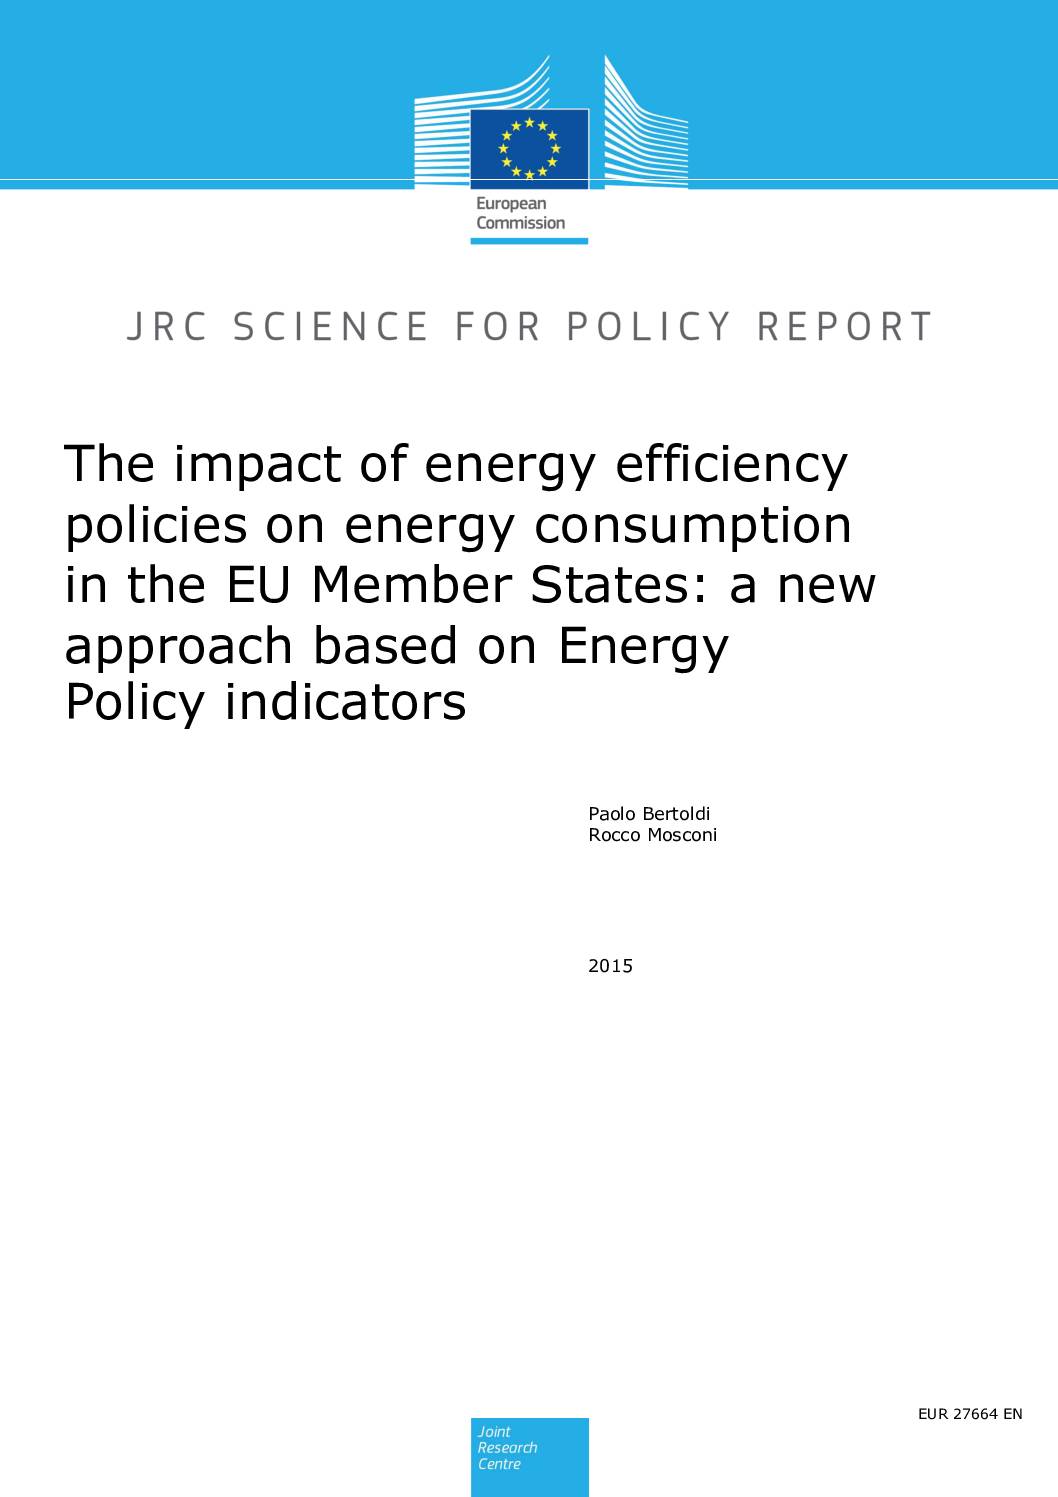 Energy efficiency policies on energy consumption